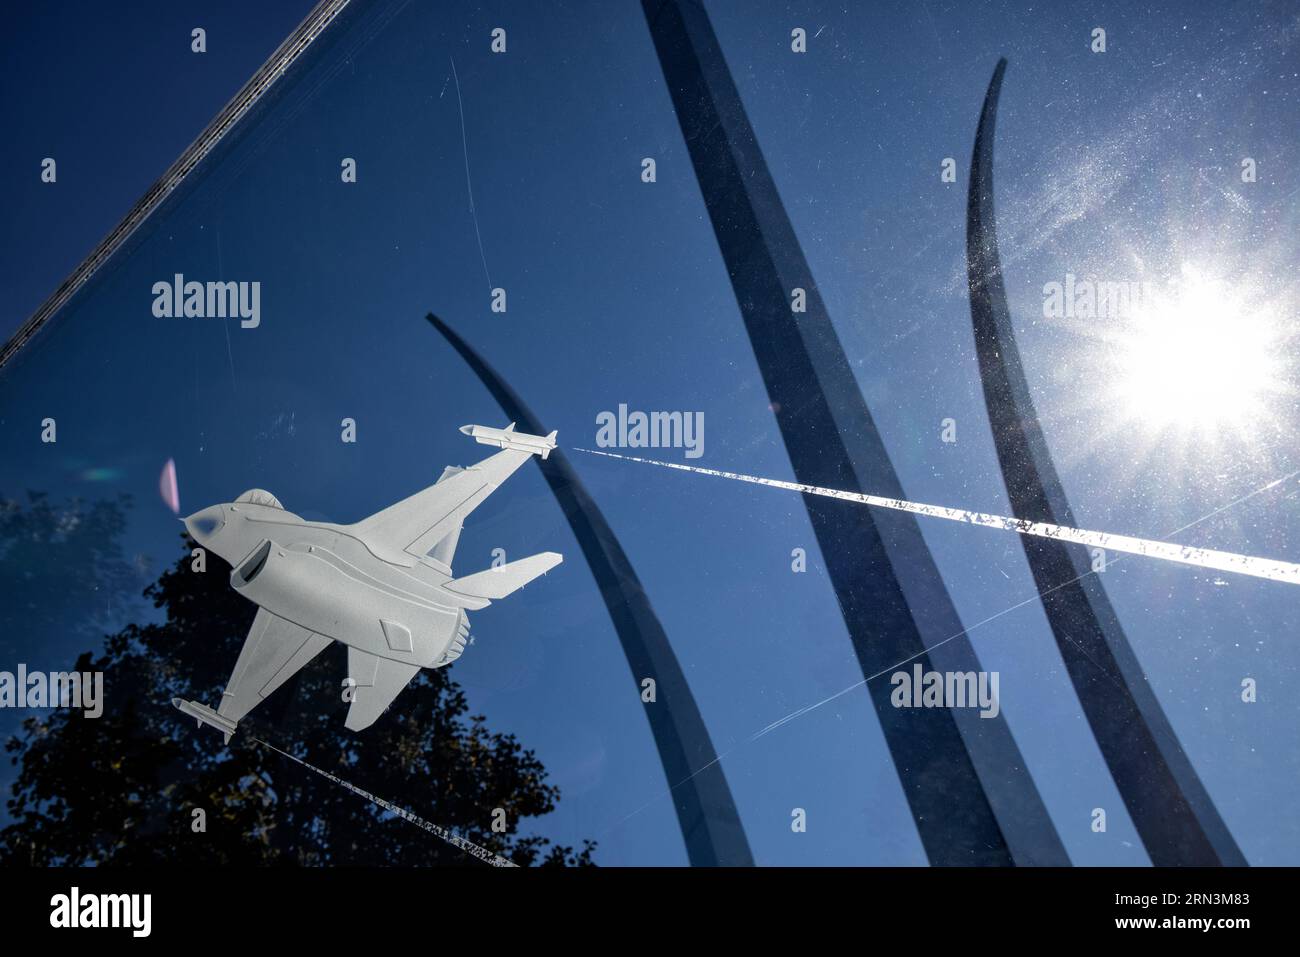 ARLINGTON, Virginia, United States — The Air Force Memorial, with its soaring spires, stands as a tribute to the men and women who have served in the United States Air Force. Located in Arlington, it offers visitors a symbolic representation of flight and the Air Force's enduring legacy in defense and aerospace. Stock Photo